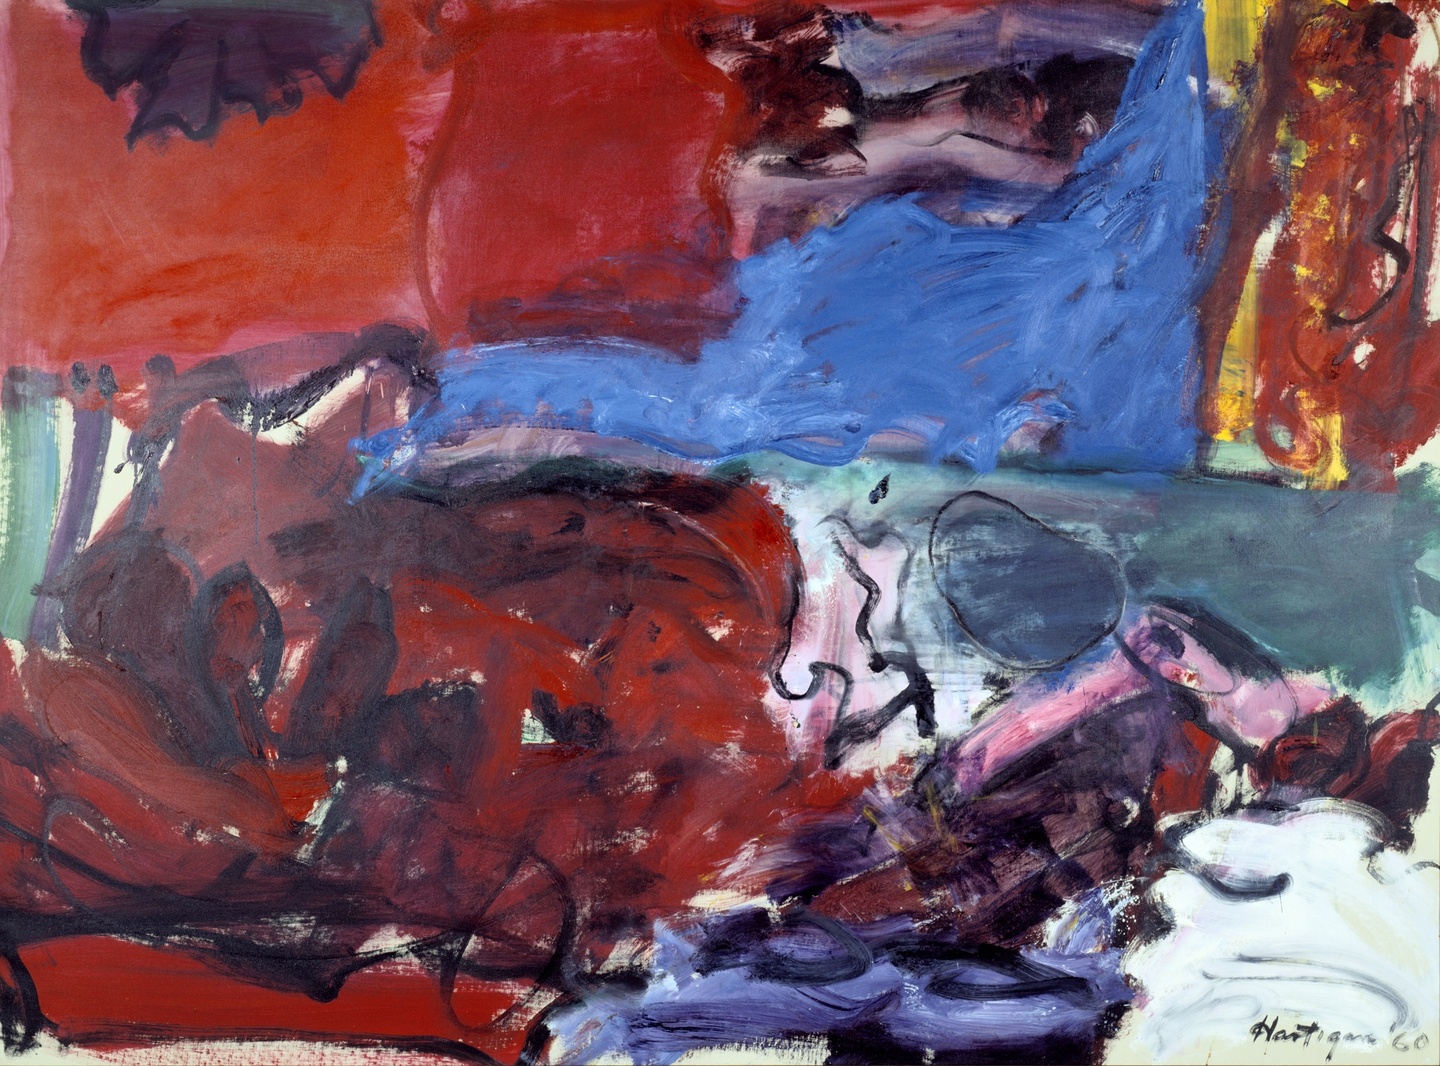 An abstract painting with vibrant red and blue patches